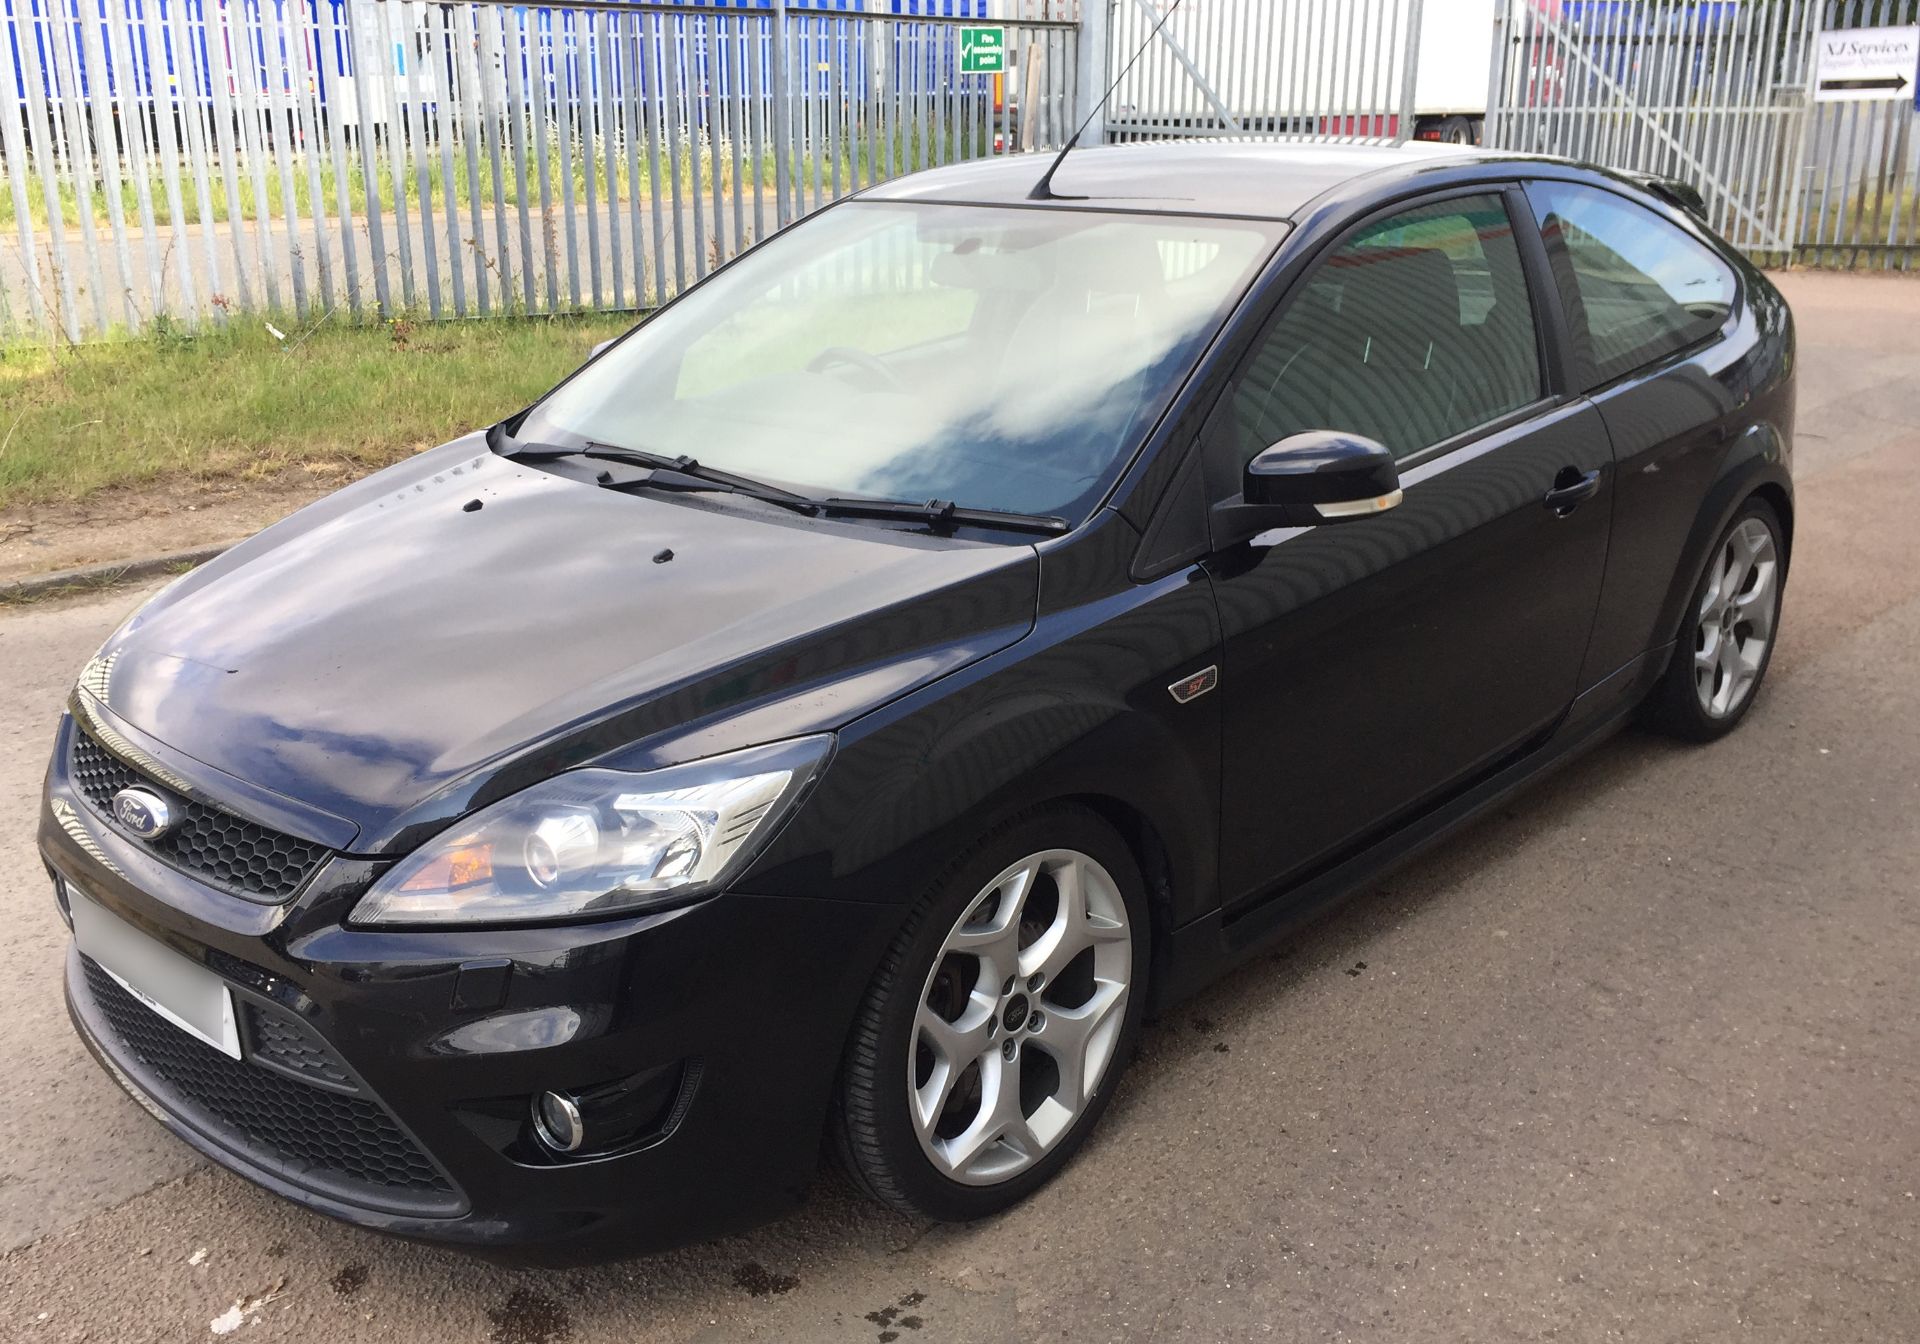 2008 Ford Focus ST-3 224 BHP 3Dr Hatchback - CL505 - NO VAT ON THE HAMMER - Location: Corby, - Image 2 of 16